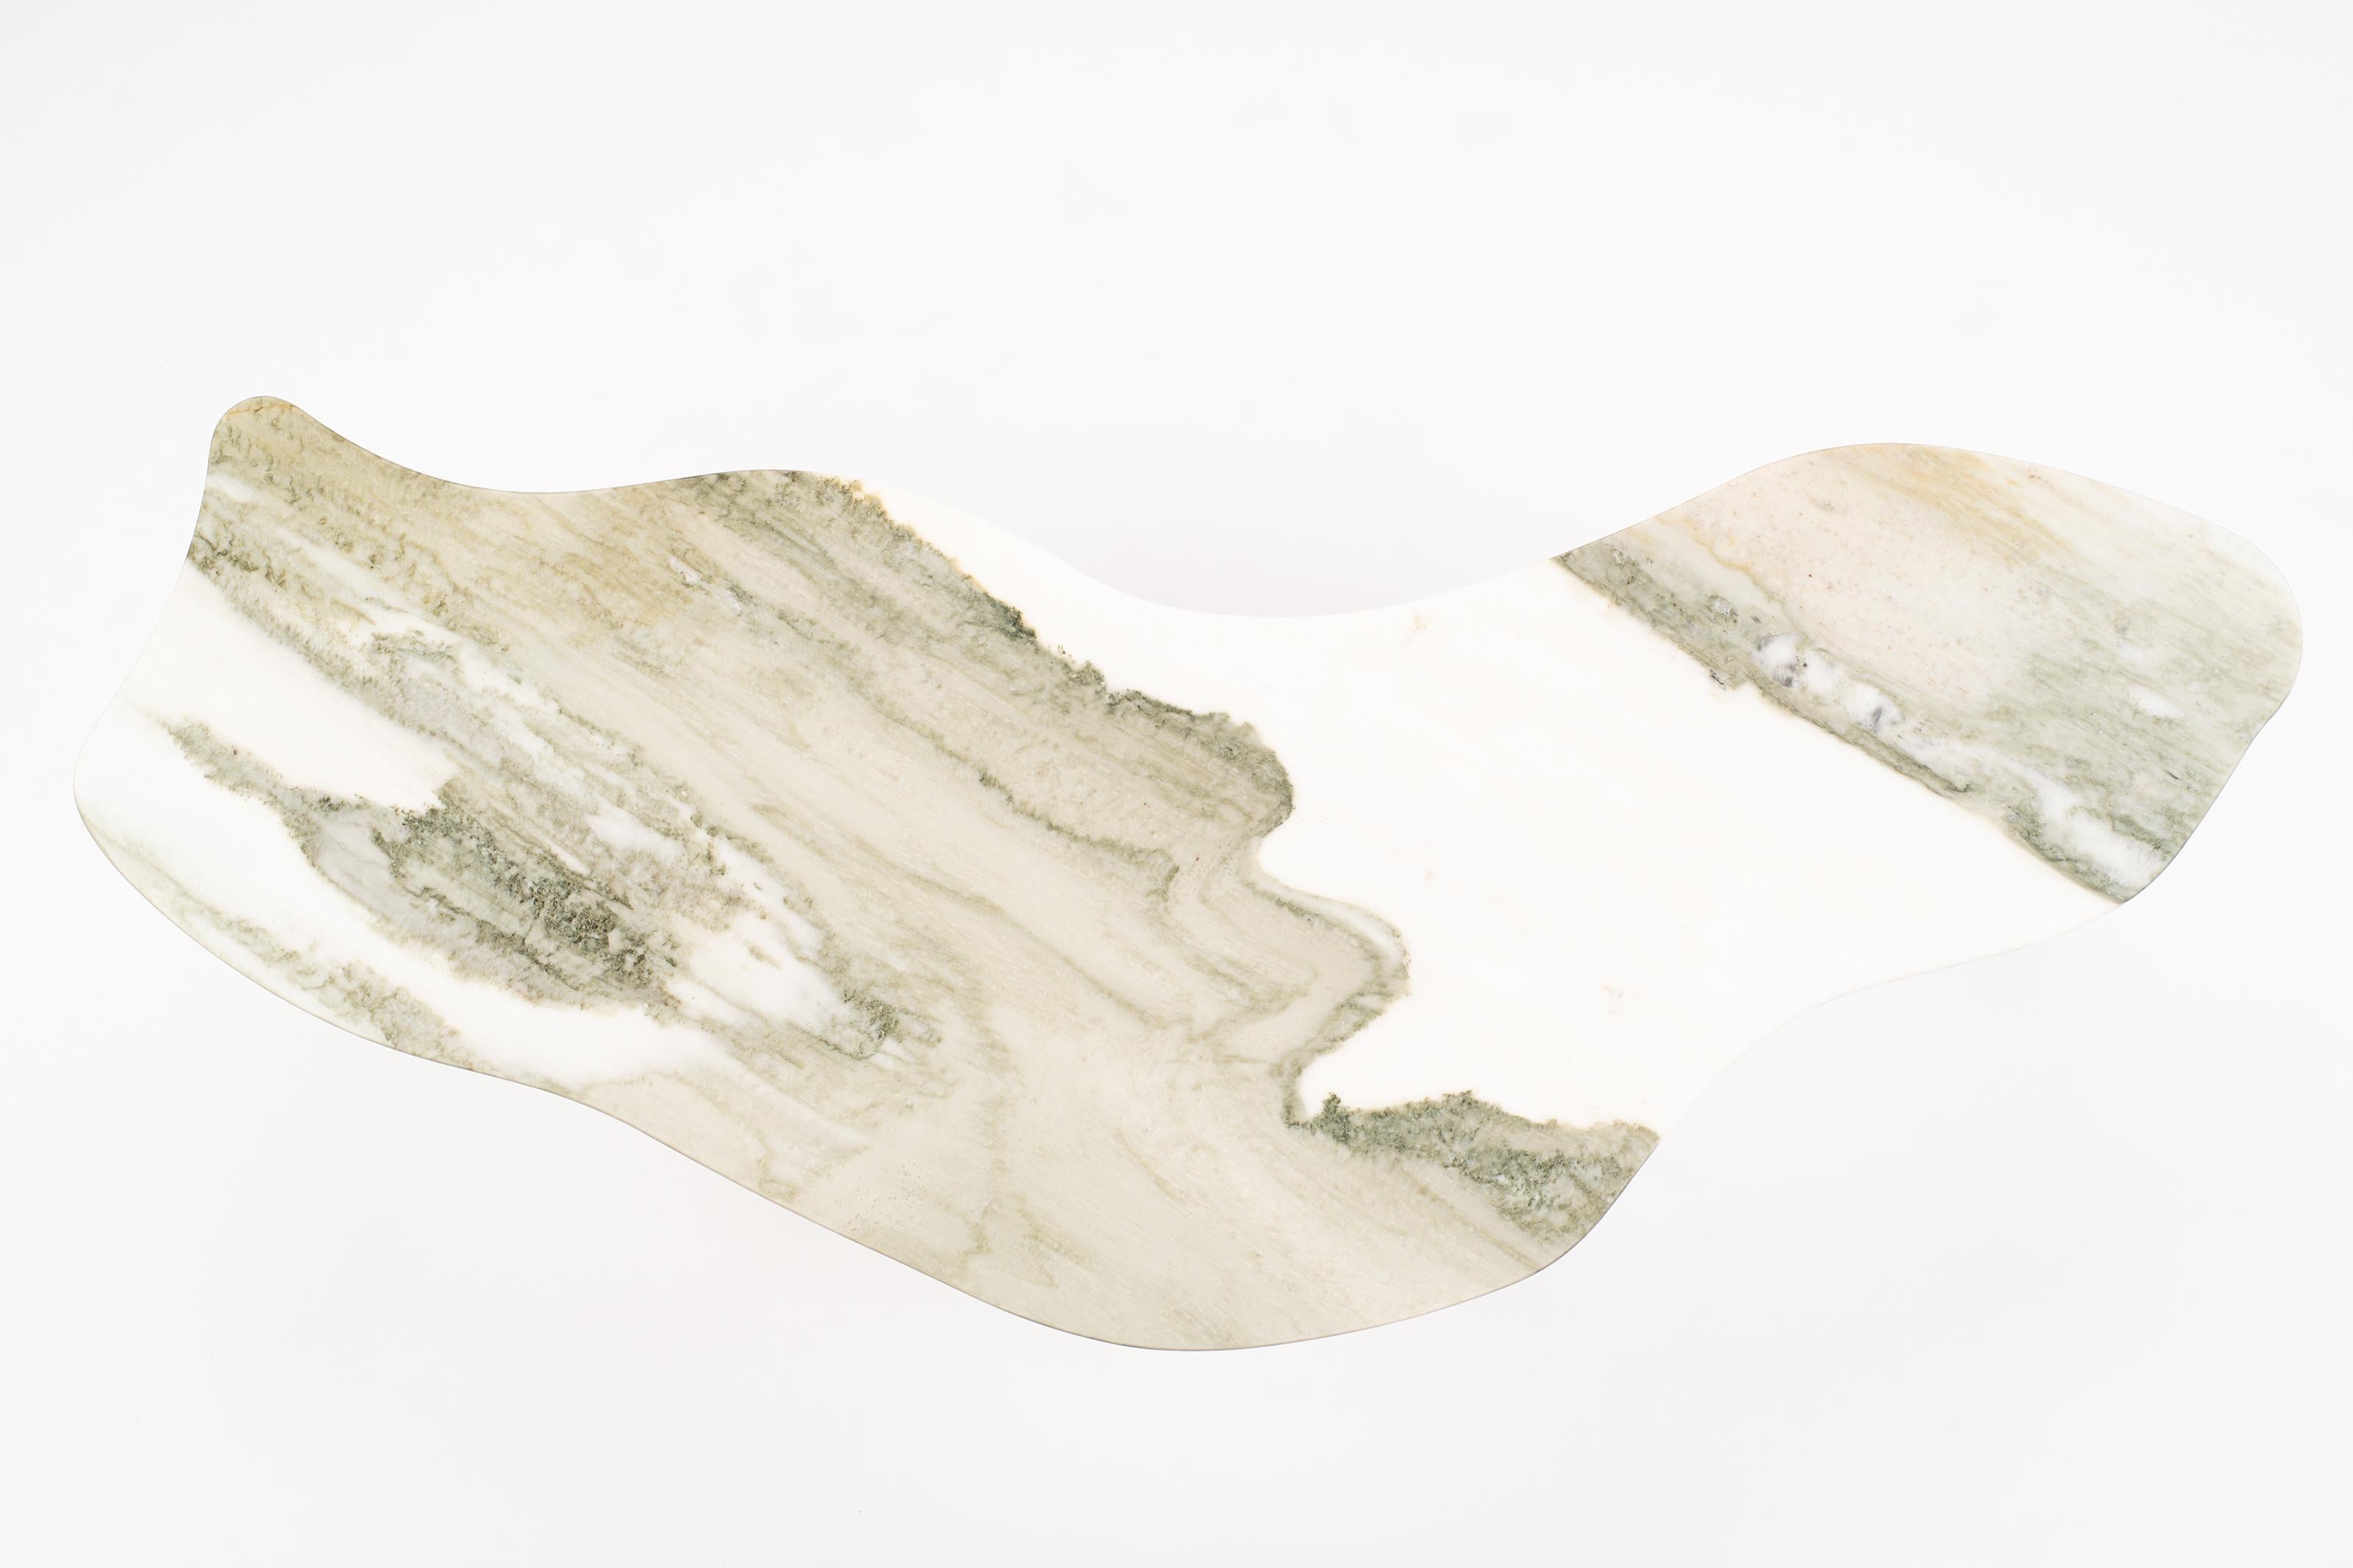 Bicolor sculptural marble table - Lorenzo Bini

Title: Calcatta

Measures:
- Dining table 250 x 100 x H 73.5 cm
- Coffee table 125 x 50 x H 37 cm

Material: fior di pesco carnico


SIX TABLEAUX is a series of marble tables designed by